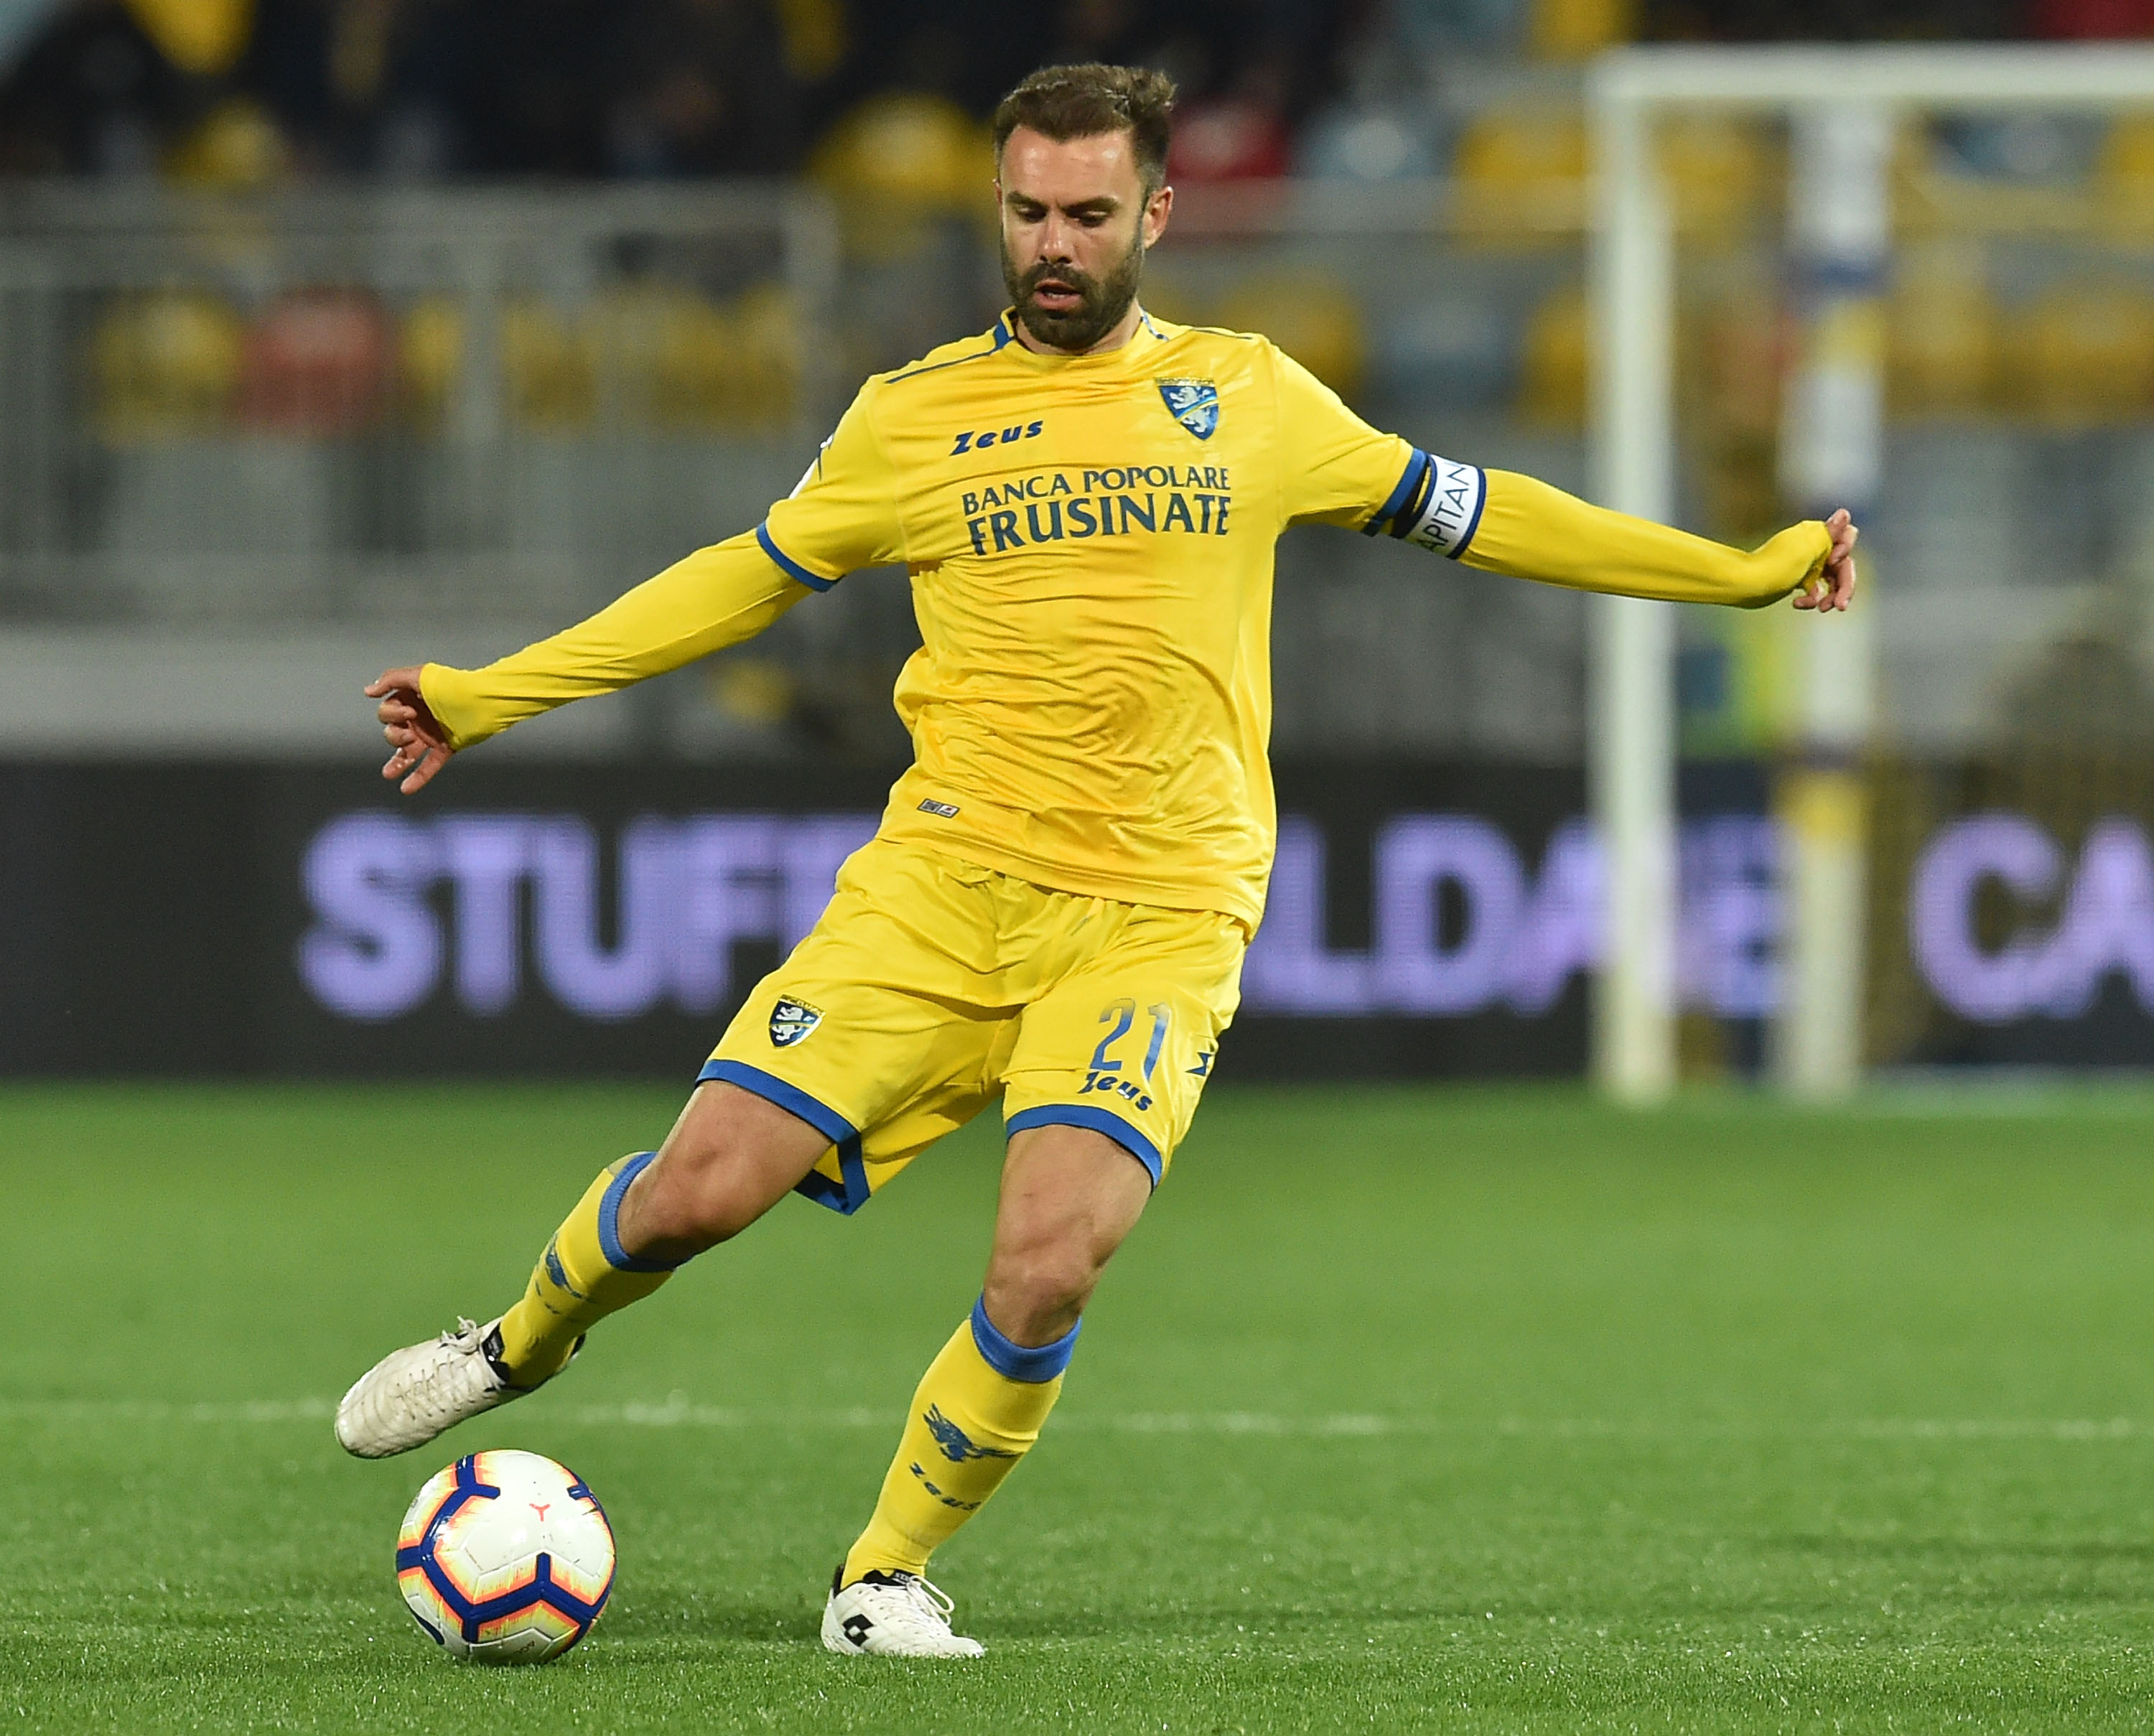 FROSINONE, ITALY - APRIL 03: Paolo Sammarco of Frosinone Calcio in action during the Serie A match between Frosinone Calcio and Parma Calcio at Stadio Benito Stirpe on April 3, 2019 in Frosinone, Italy.  (Photo by Giuseppe Bellini/Getty Images)